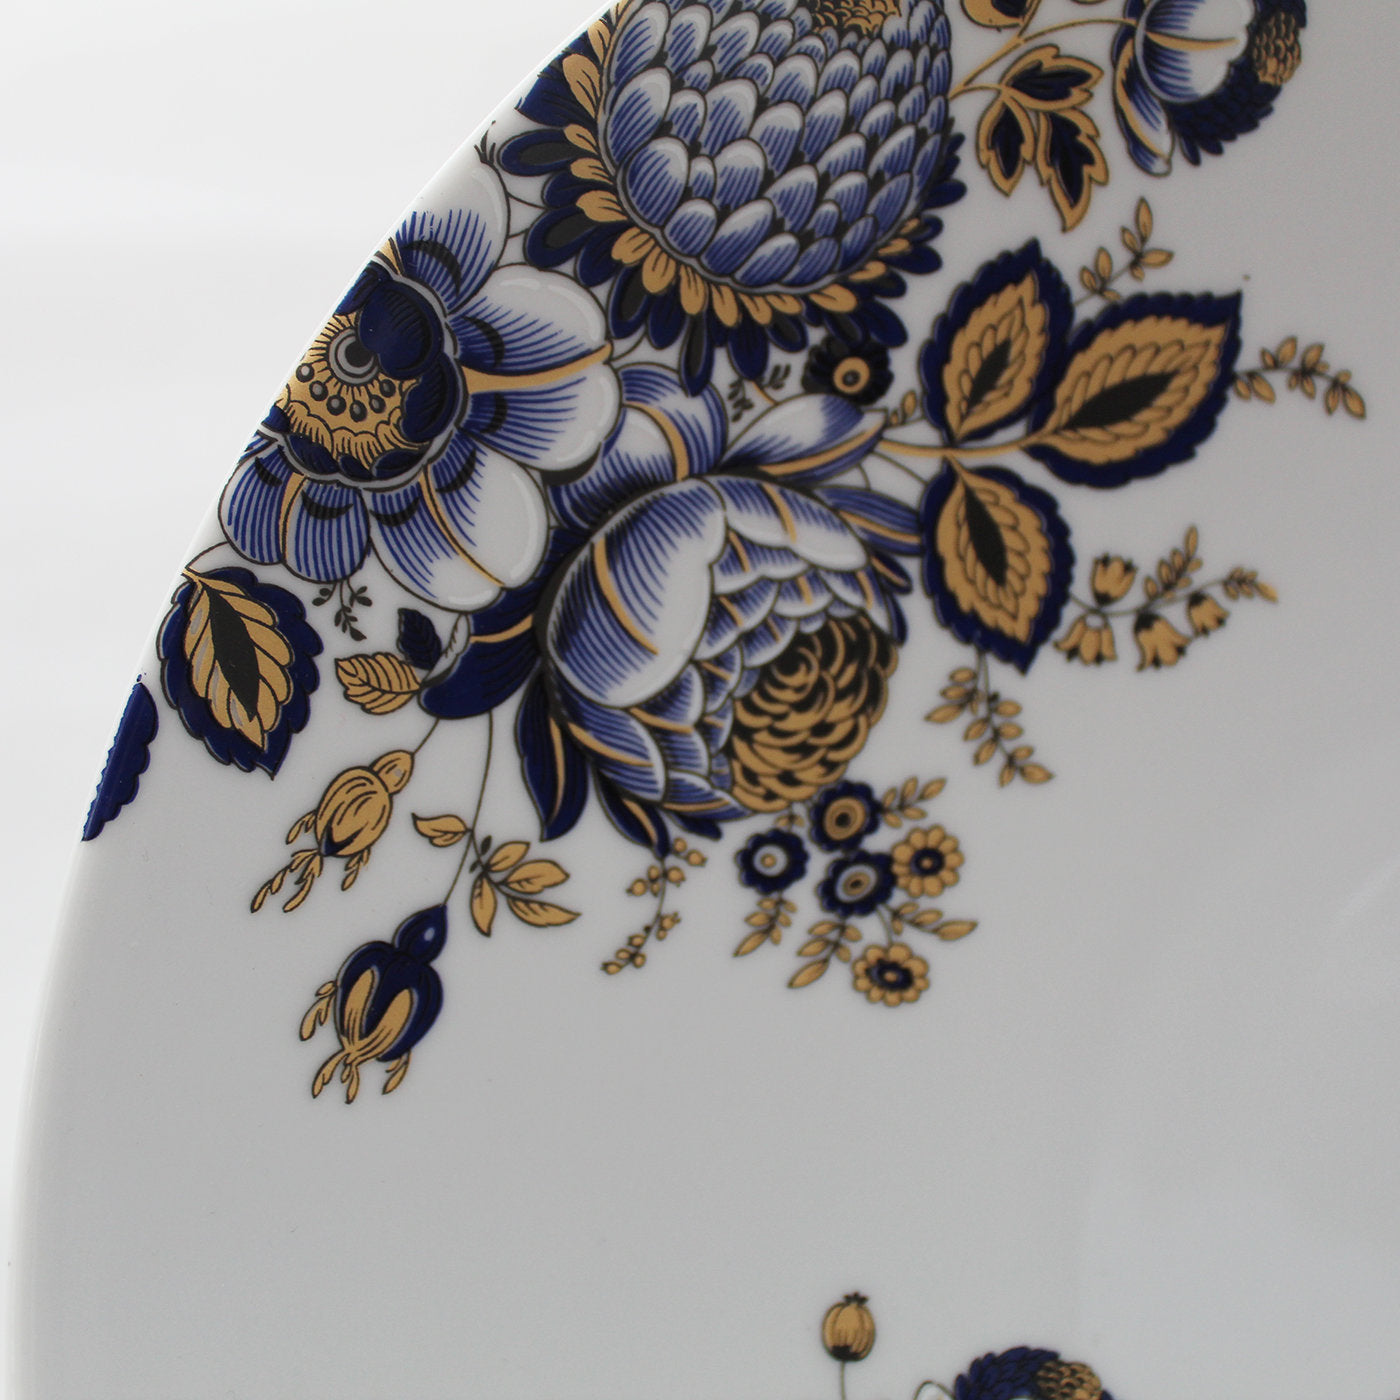 Rose Gold & Blue Risotto Serving Plate - Alternative view 1